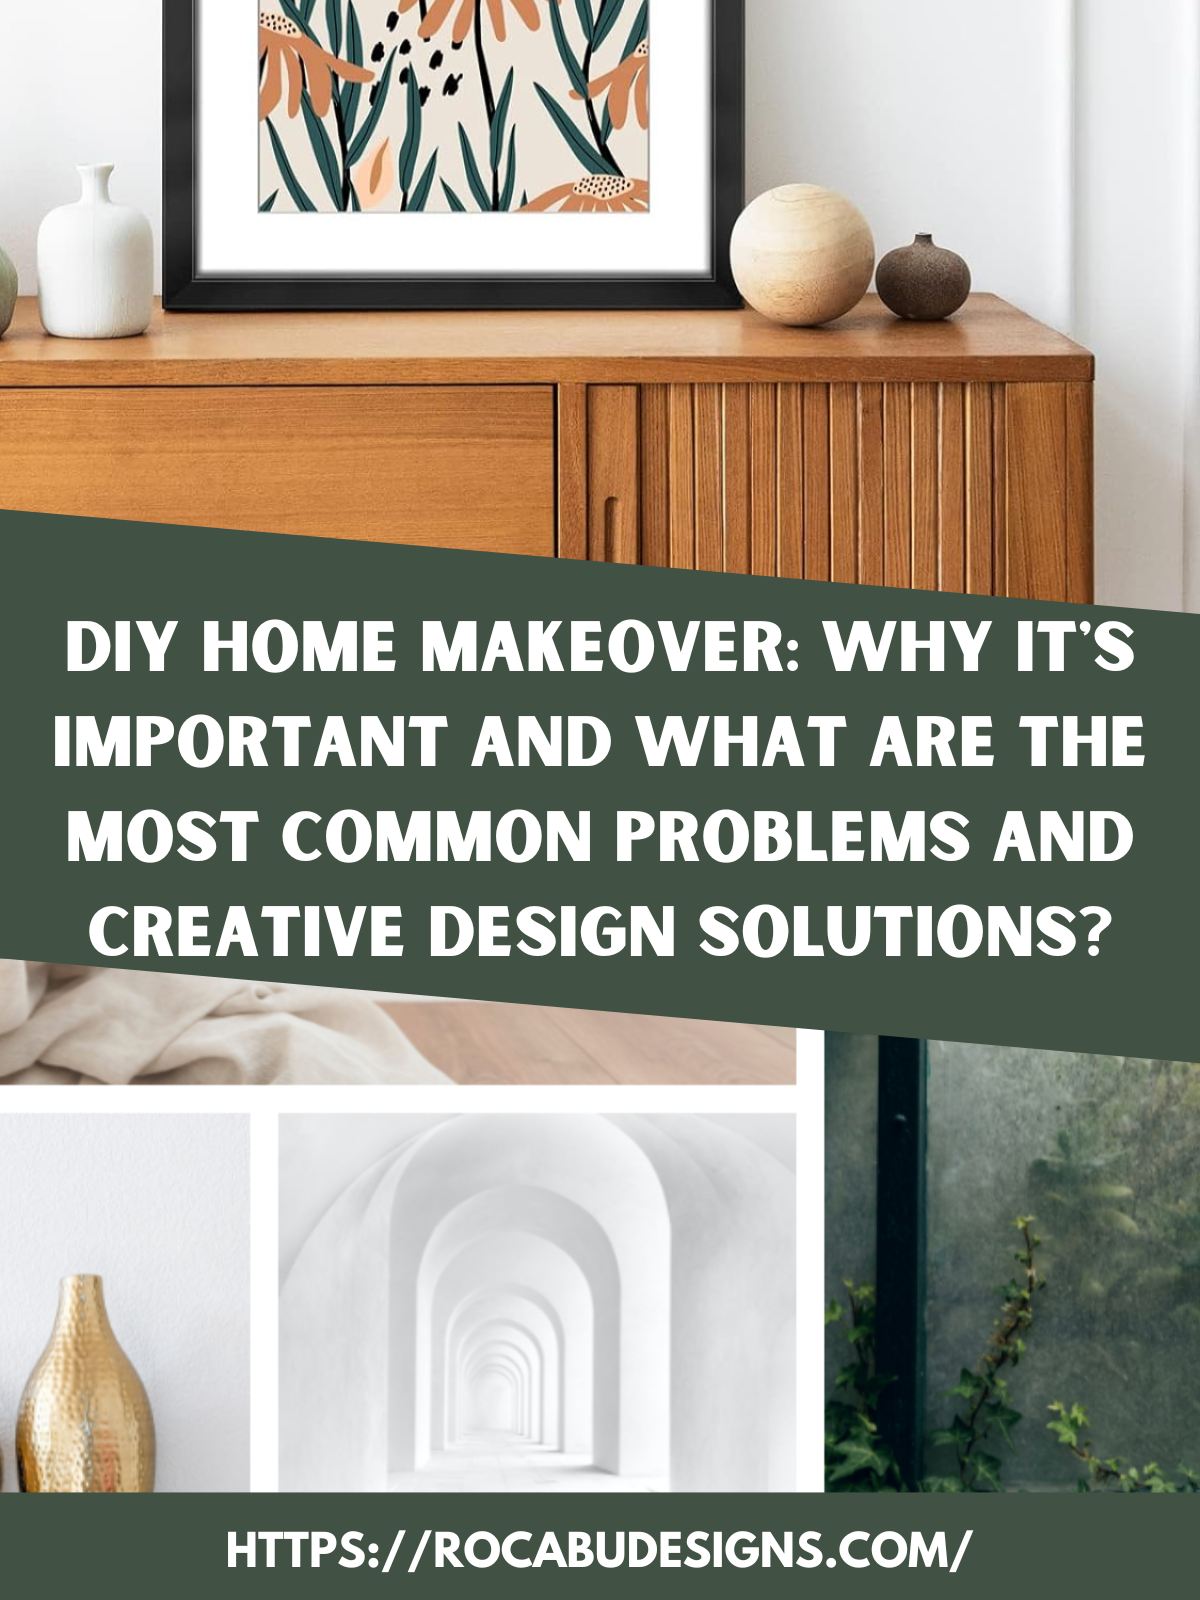 DIY Home Makeover: Why It's Important and What Are the Most Common Problems and Creative Design Solutions?